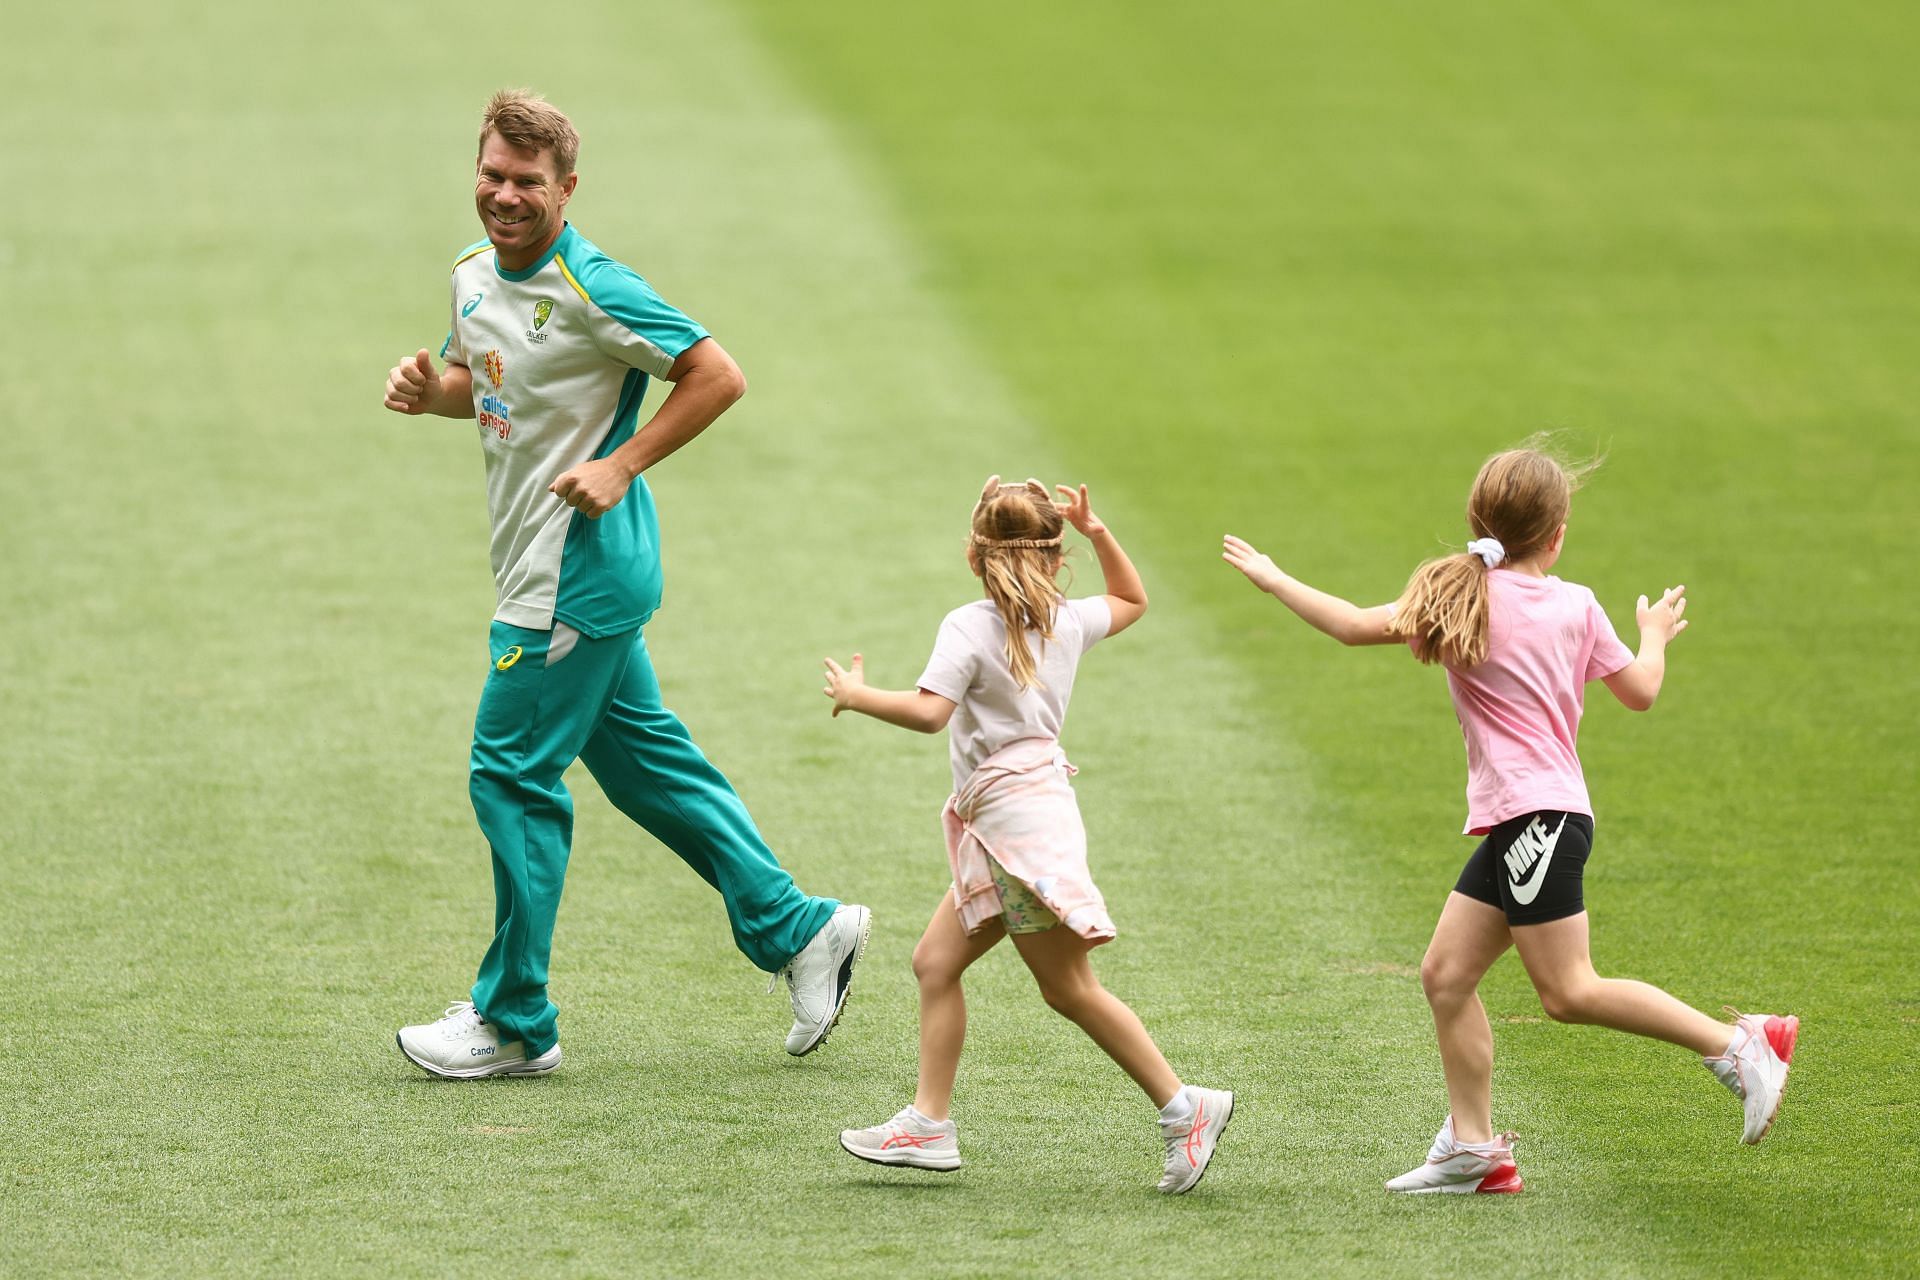 David Warner enjoys some time with his kids during a training session